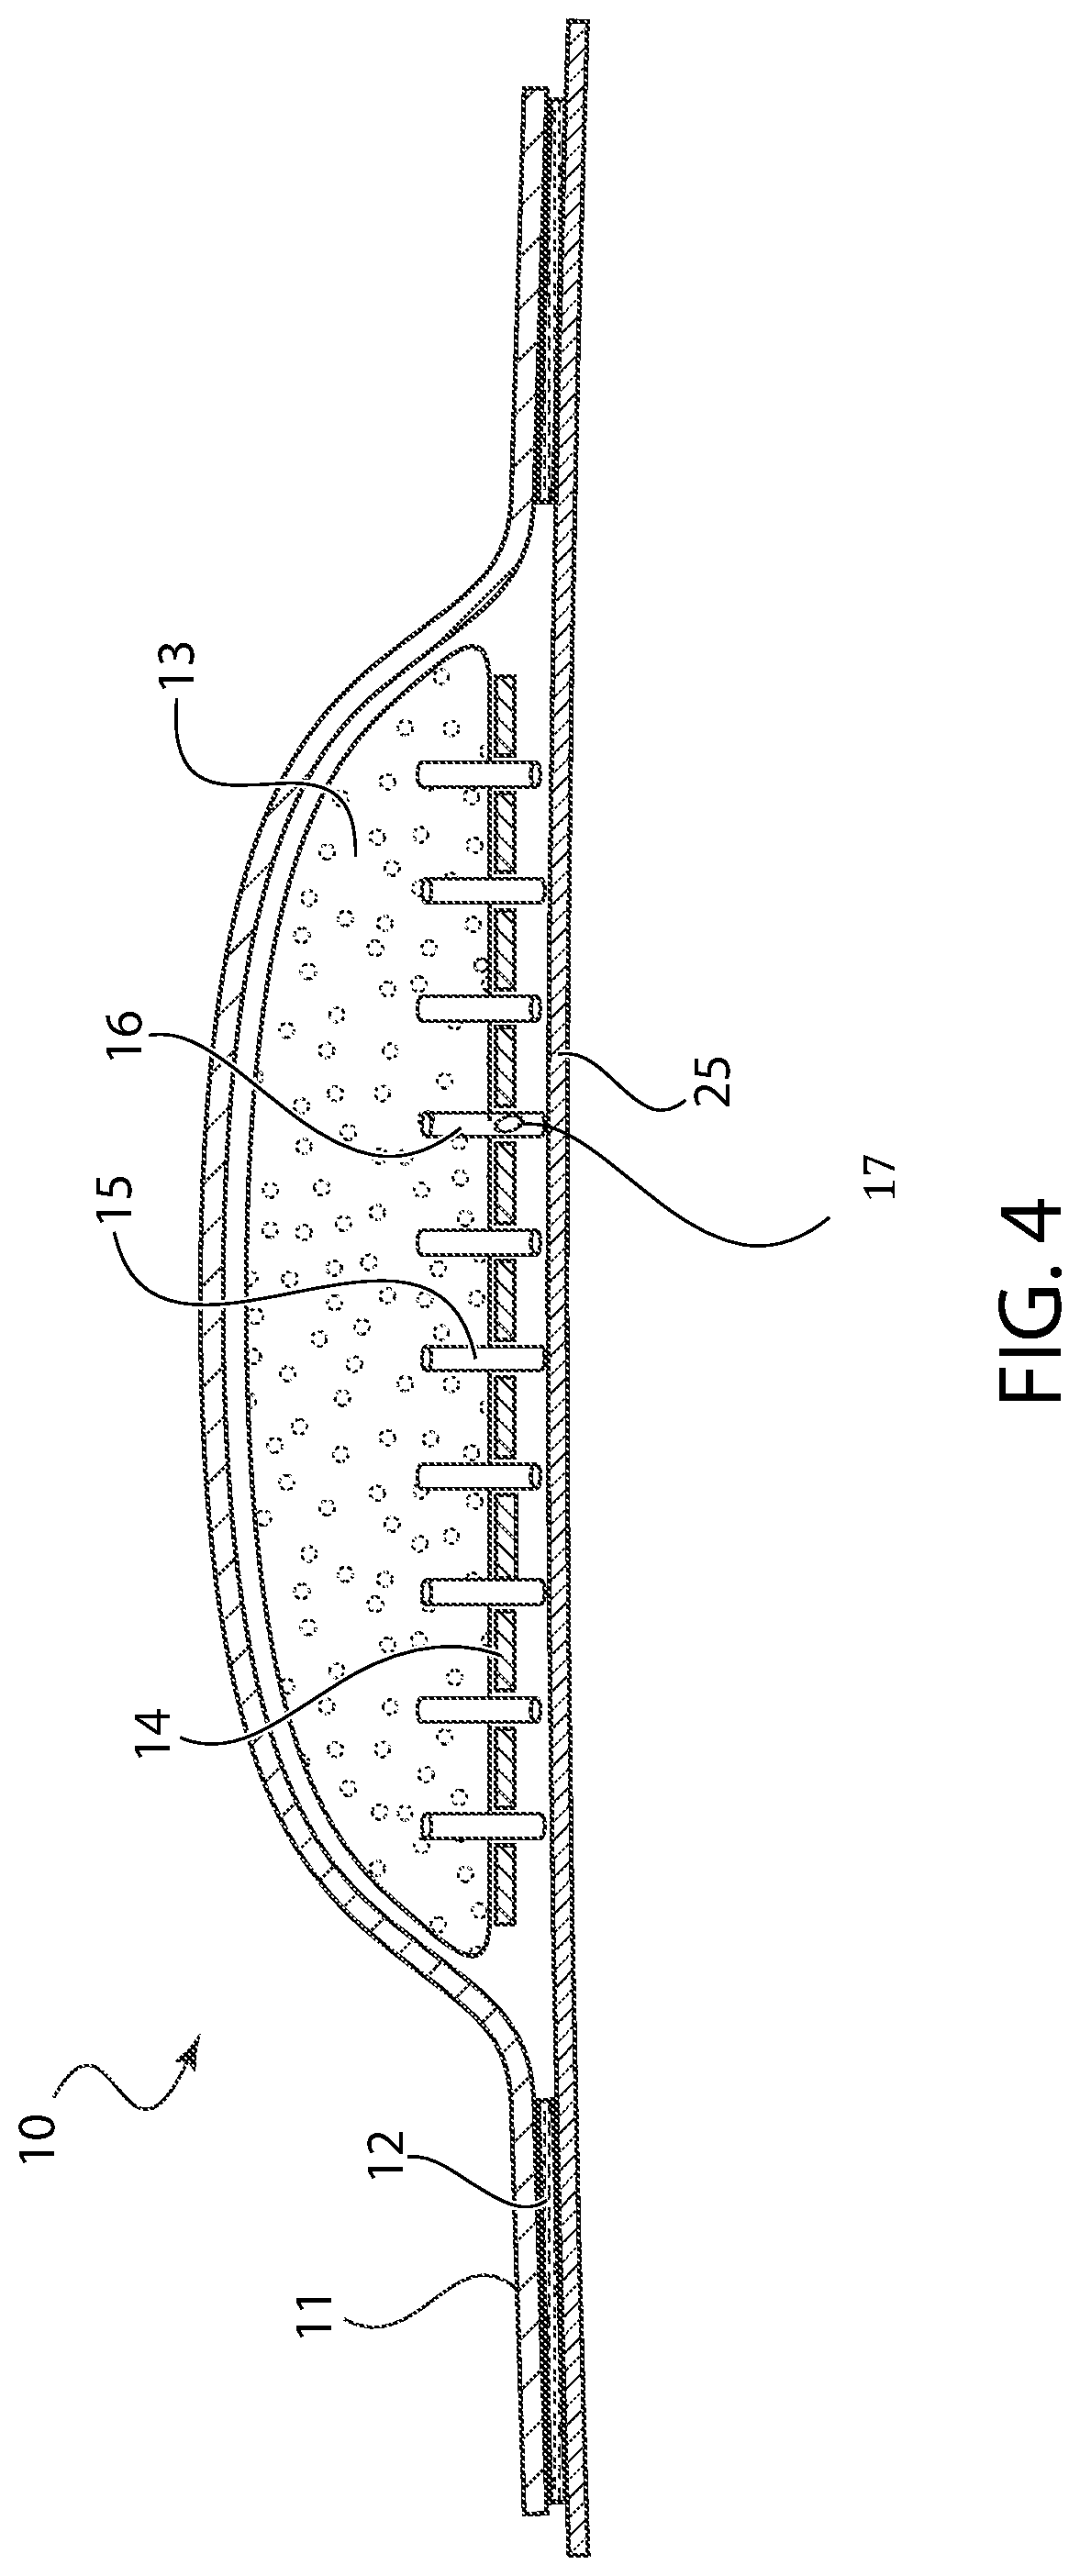 Bandage with microneedles for antimicrobial delivery and fluid absorption from a wound